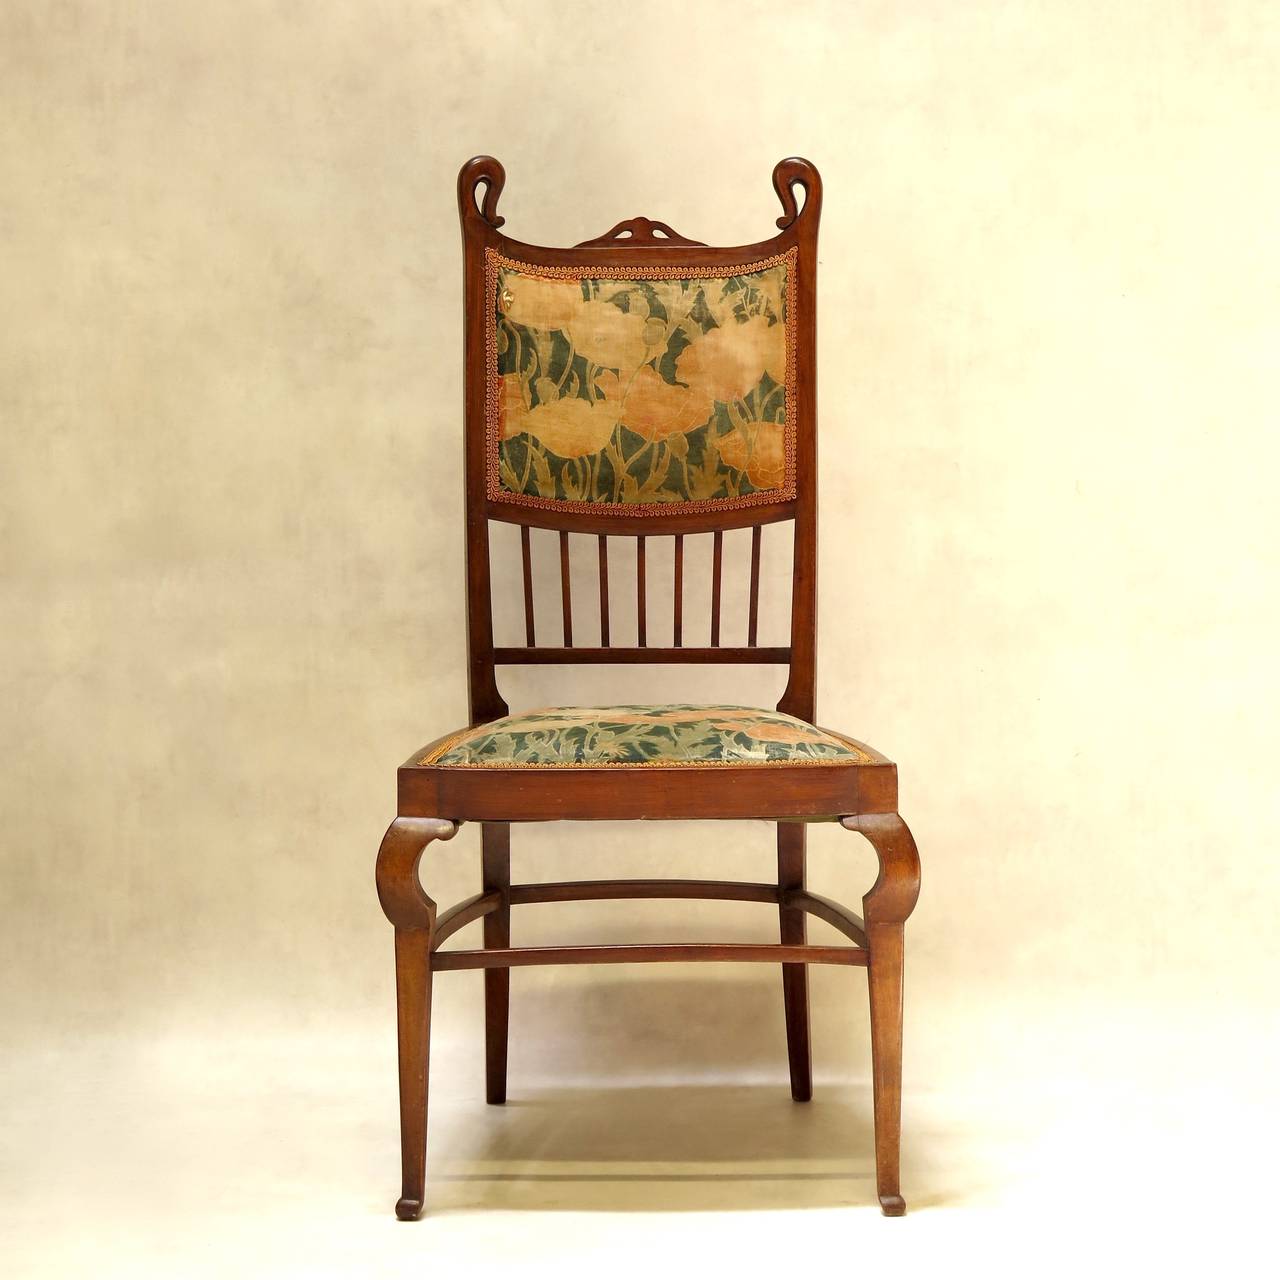 Elegant and unusual set of six Art Nouveau dining chairs in a warm-coloured wood, with high backs, trapezoidal seats, unusual marked knees and sabre back legs. Lovely lines.

Original and charming (if slightly faded and worn) velvet fabric,